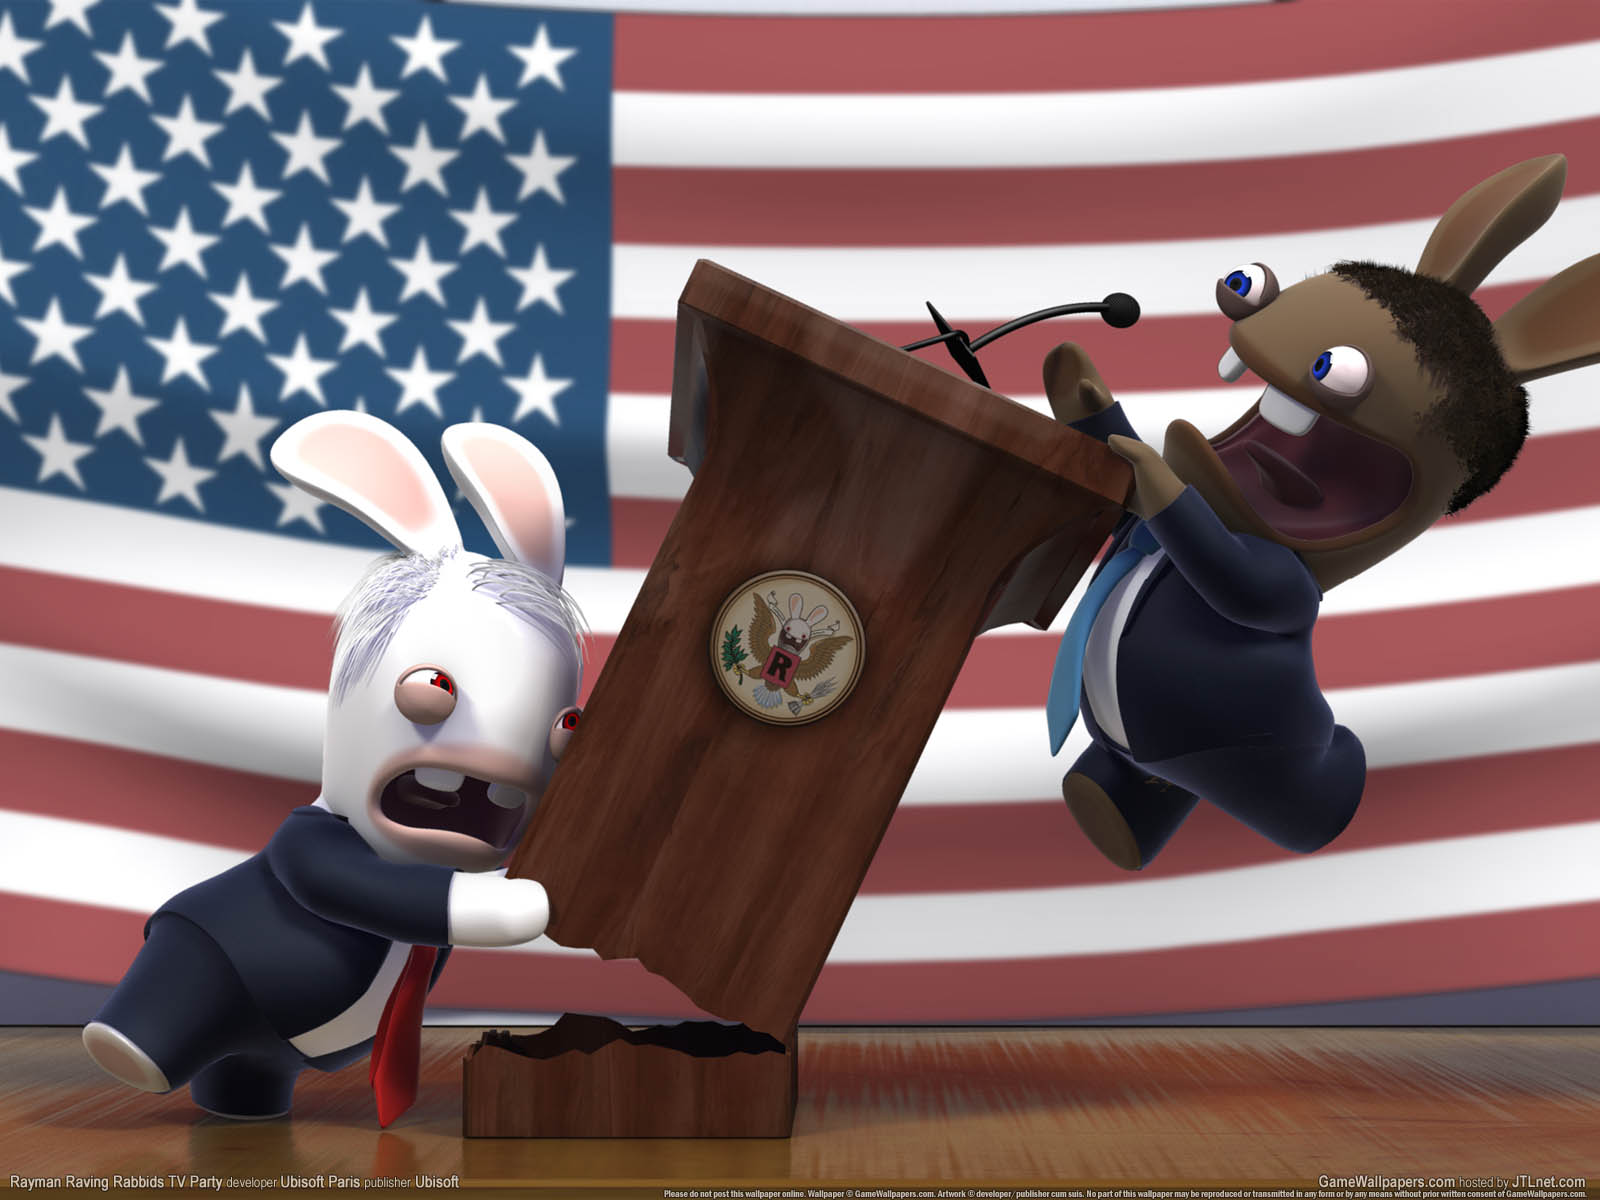 Rayman Raving Rabbids TV Party achtergrond 07 1600x1200